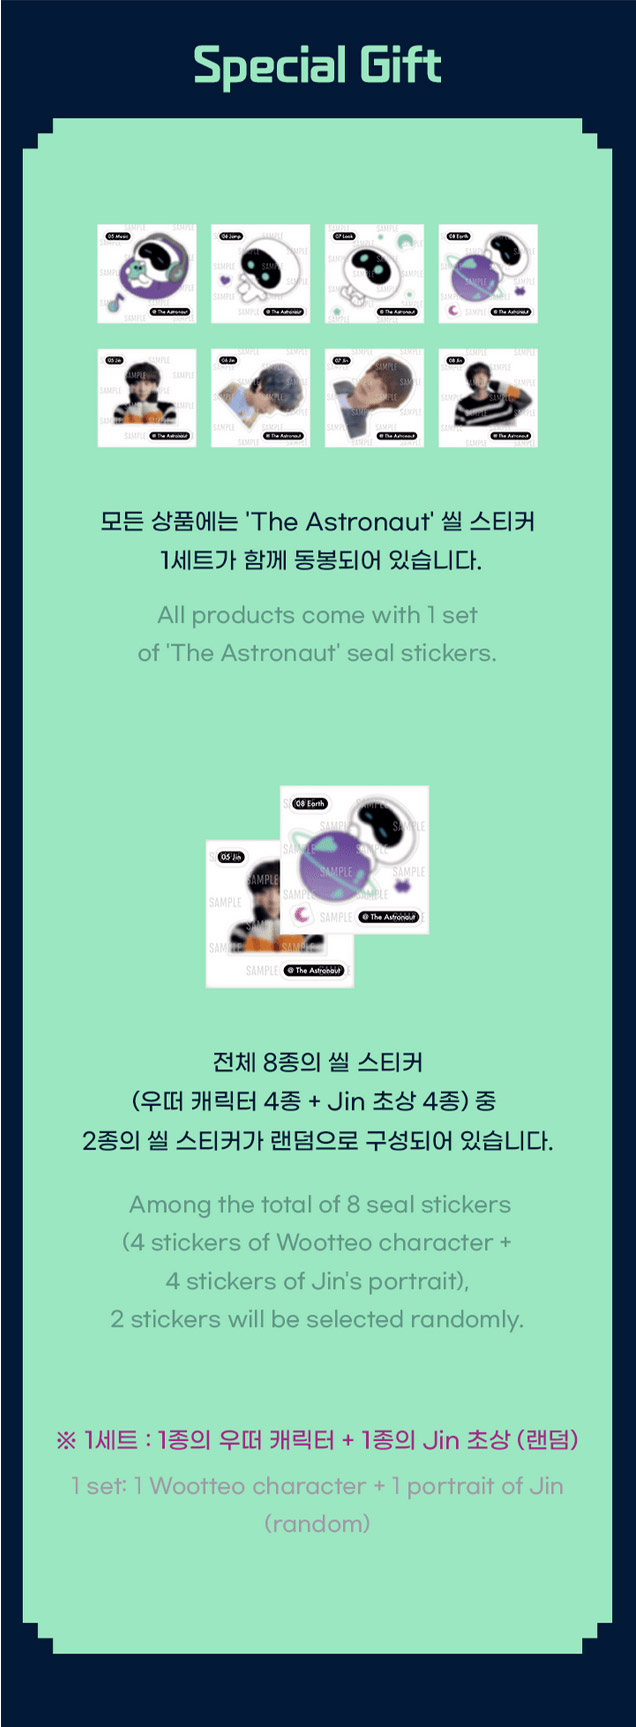 JIN The Astronaut Goods - Wootteo Doll Cushion